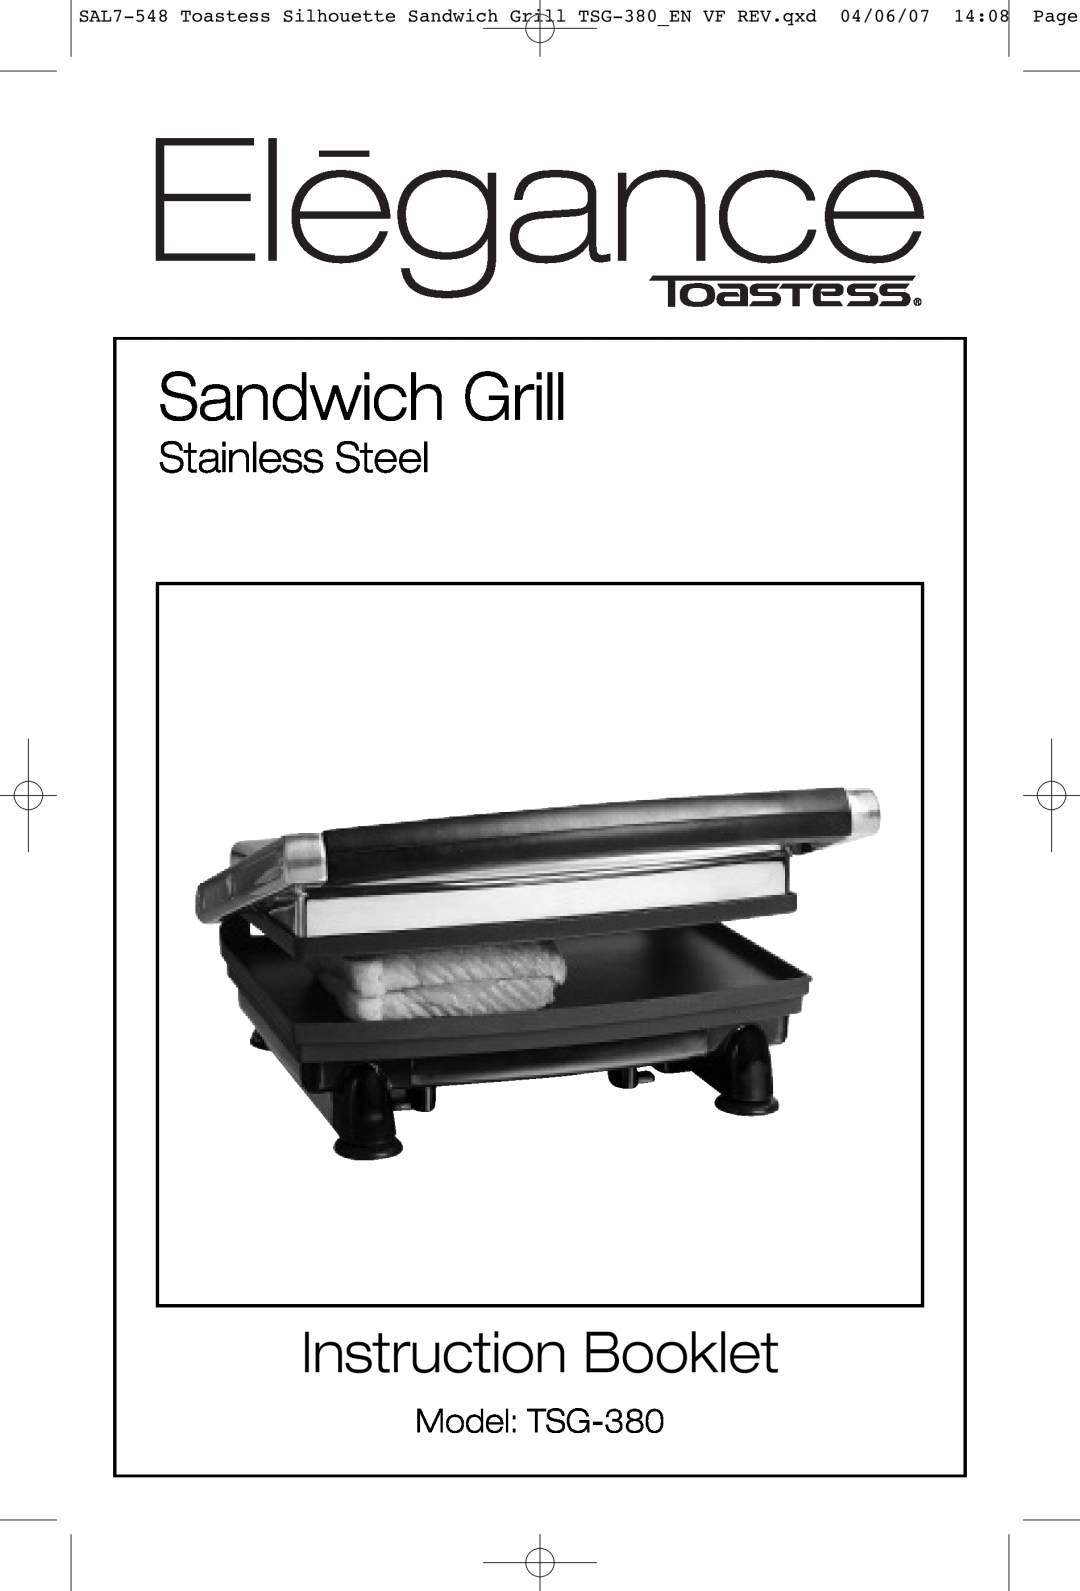 Toastess manual Model TSG-380, Sandwich Grill, Instruction Booklet, Stainless Steel 